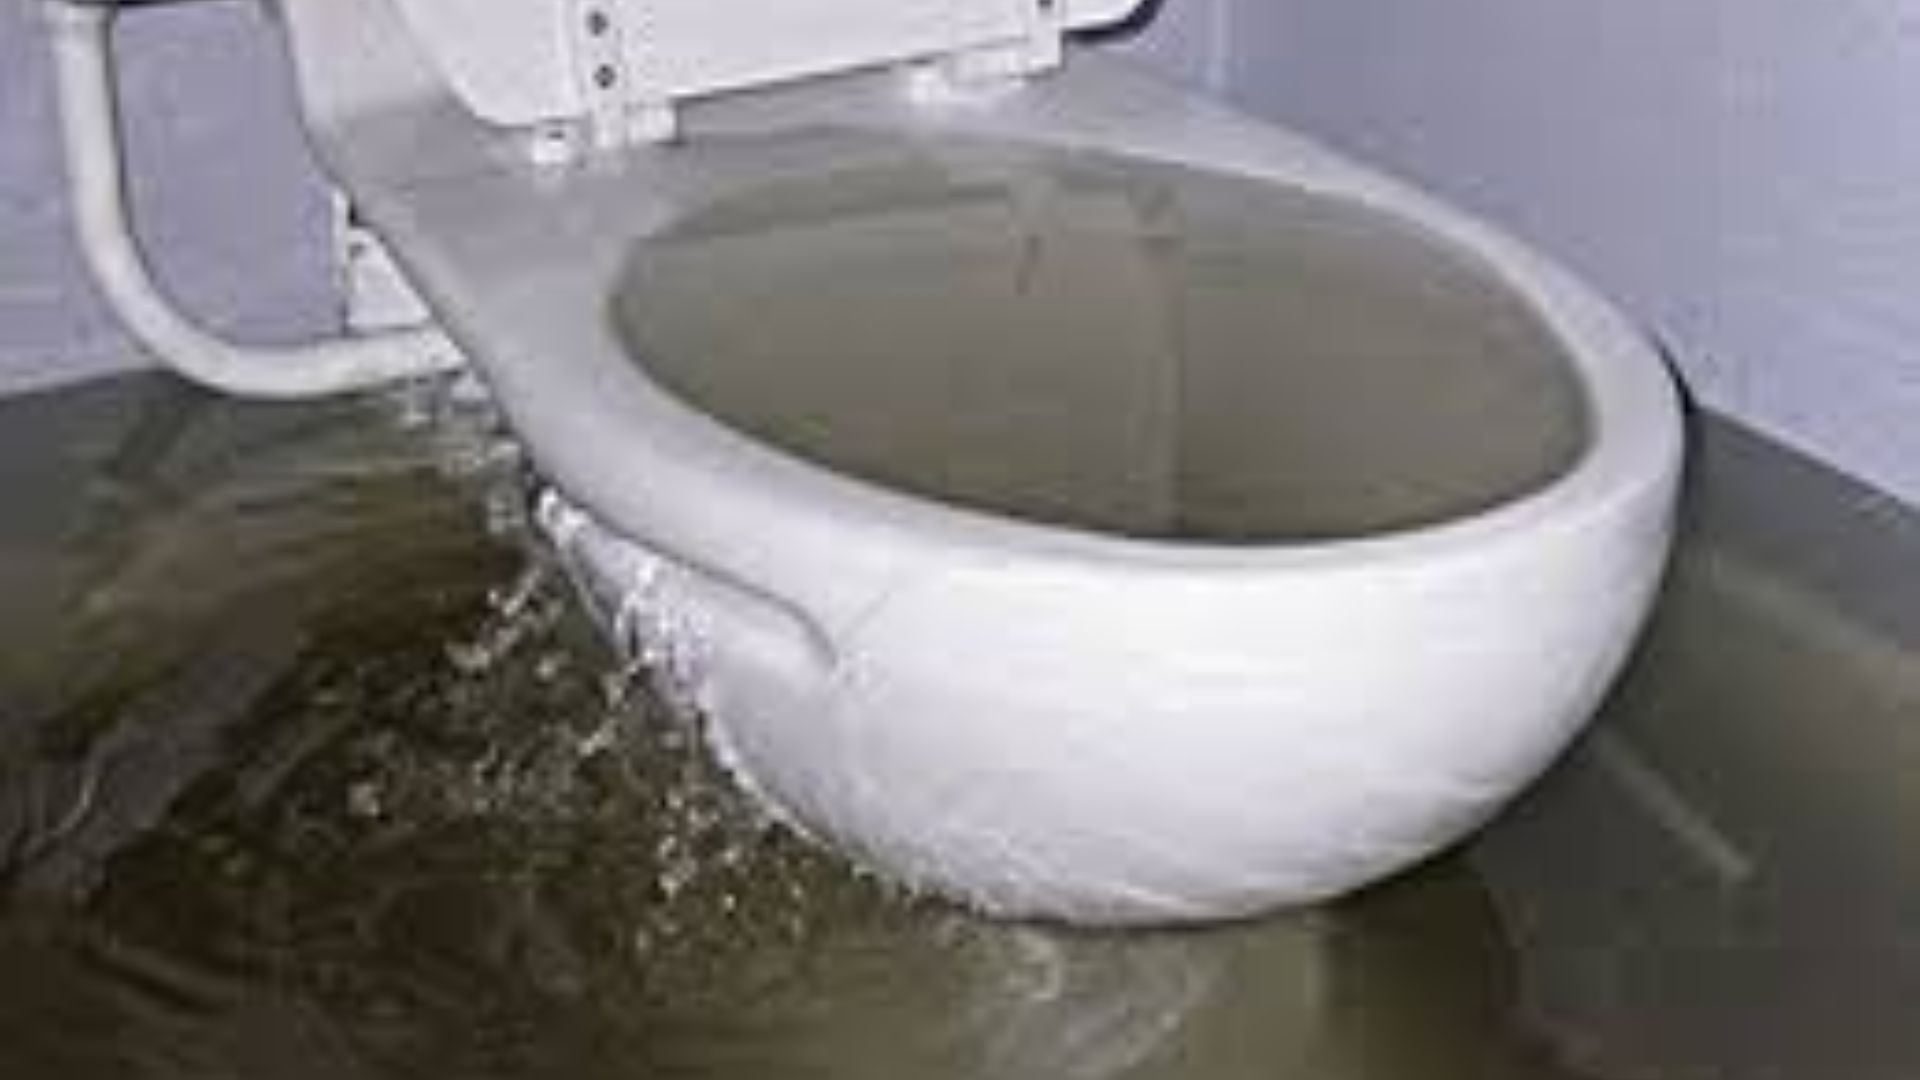 Toilet Overflowing With Dirty Water